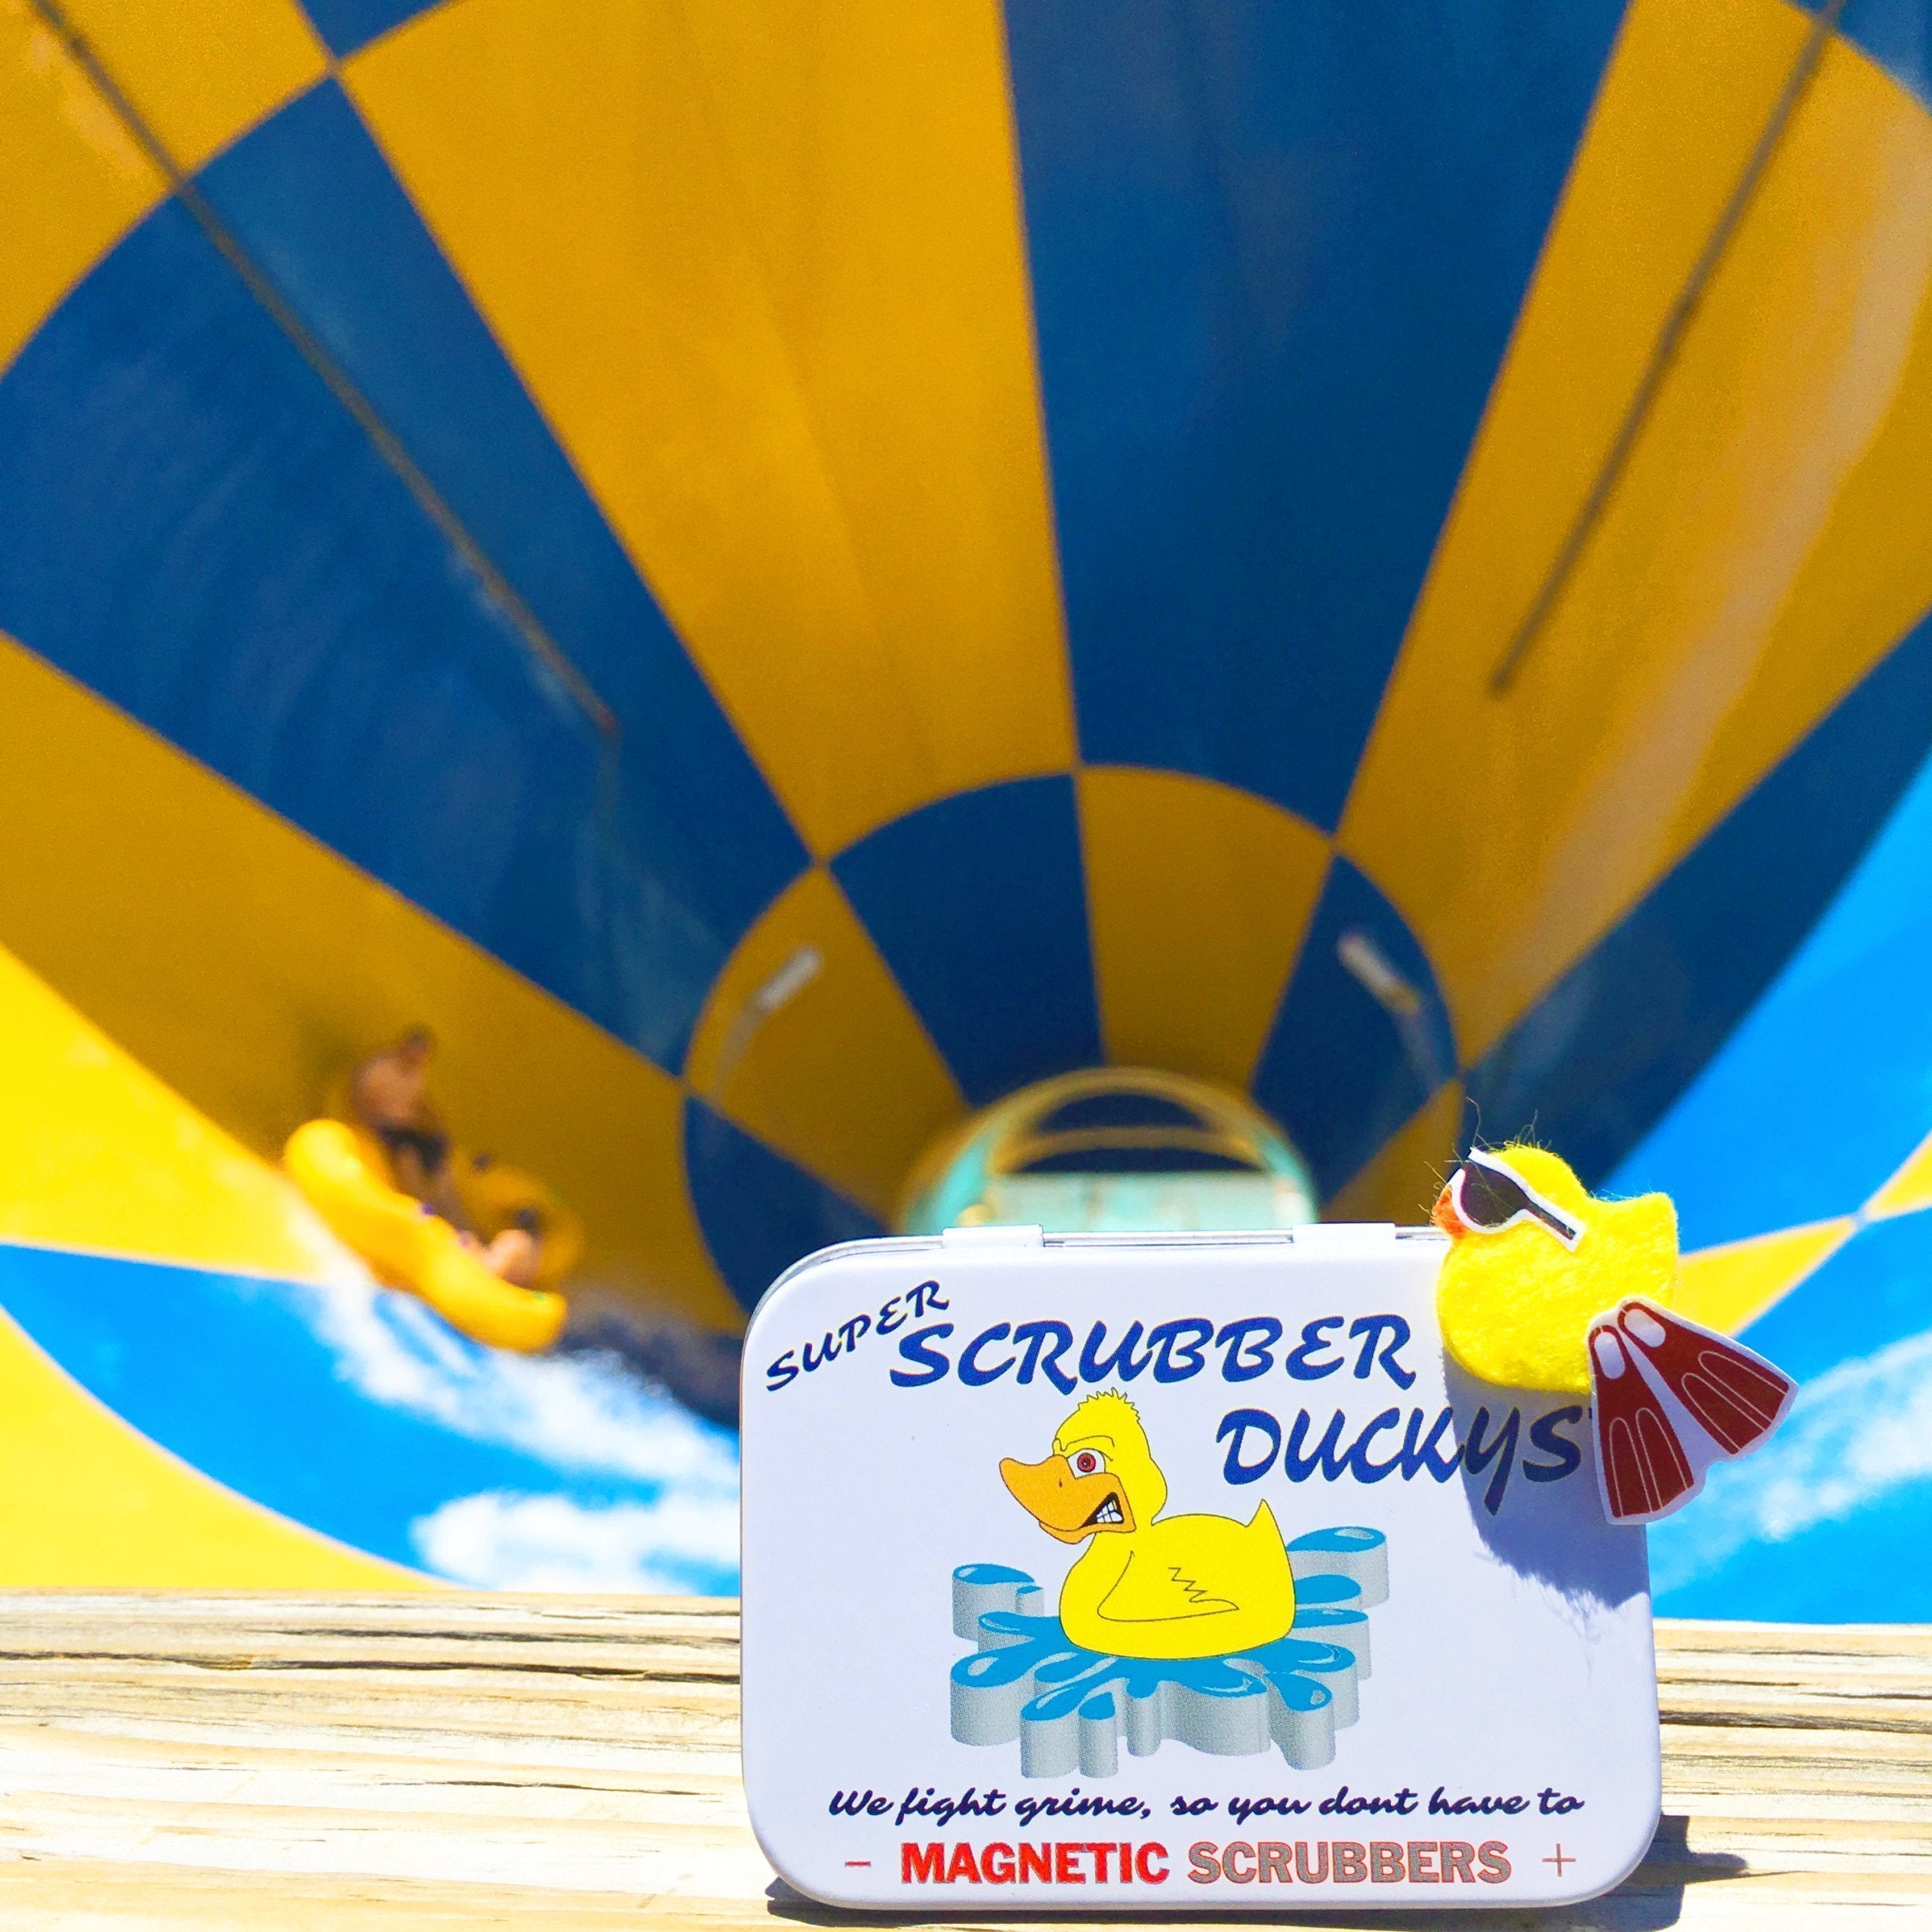 The NEW <strong>Super Scrubber Duckys</strong> are now washable and feature double-strength magnets! Each Ducky can also be cut to size to fit into smaller water pipes.